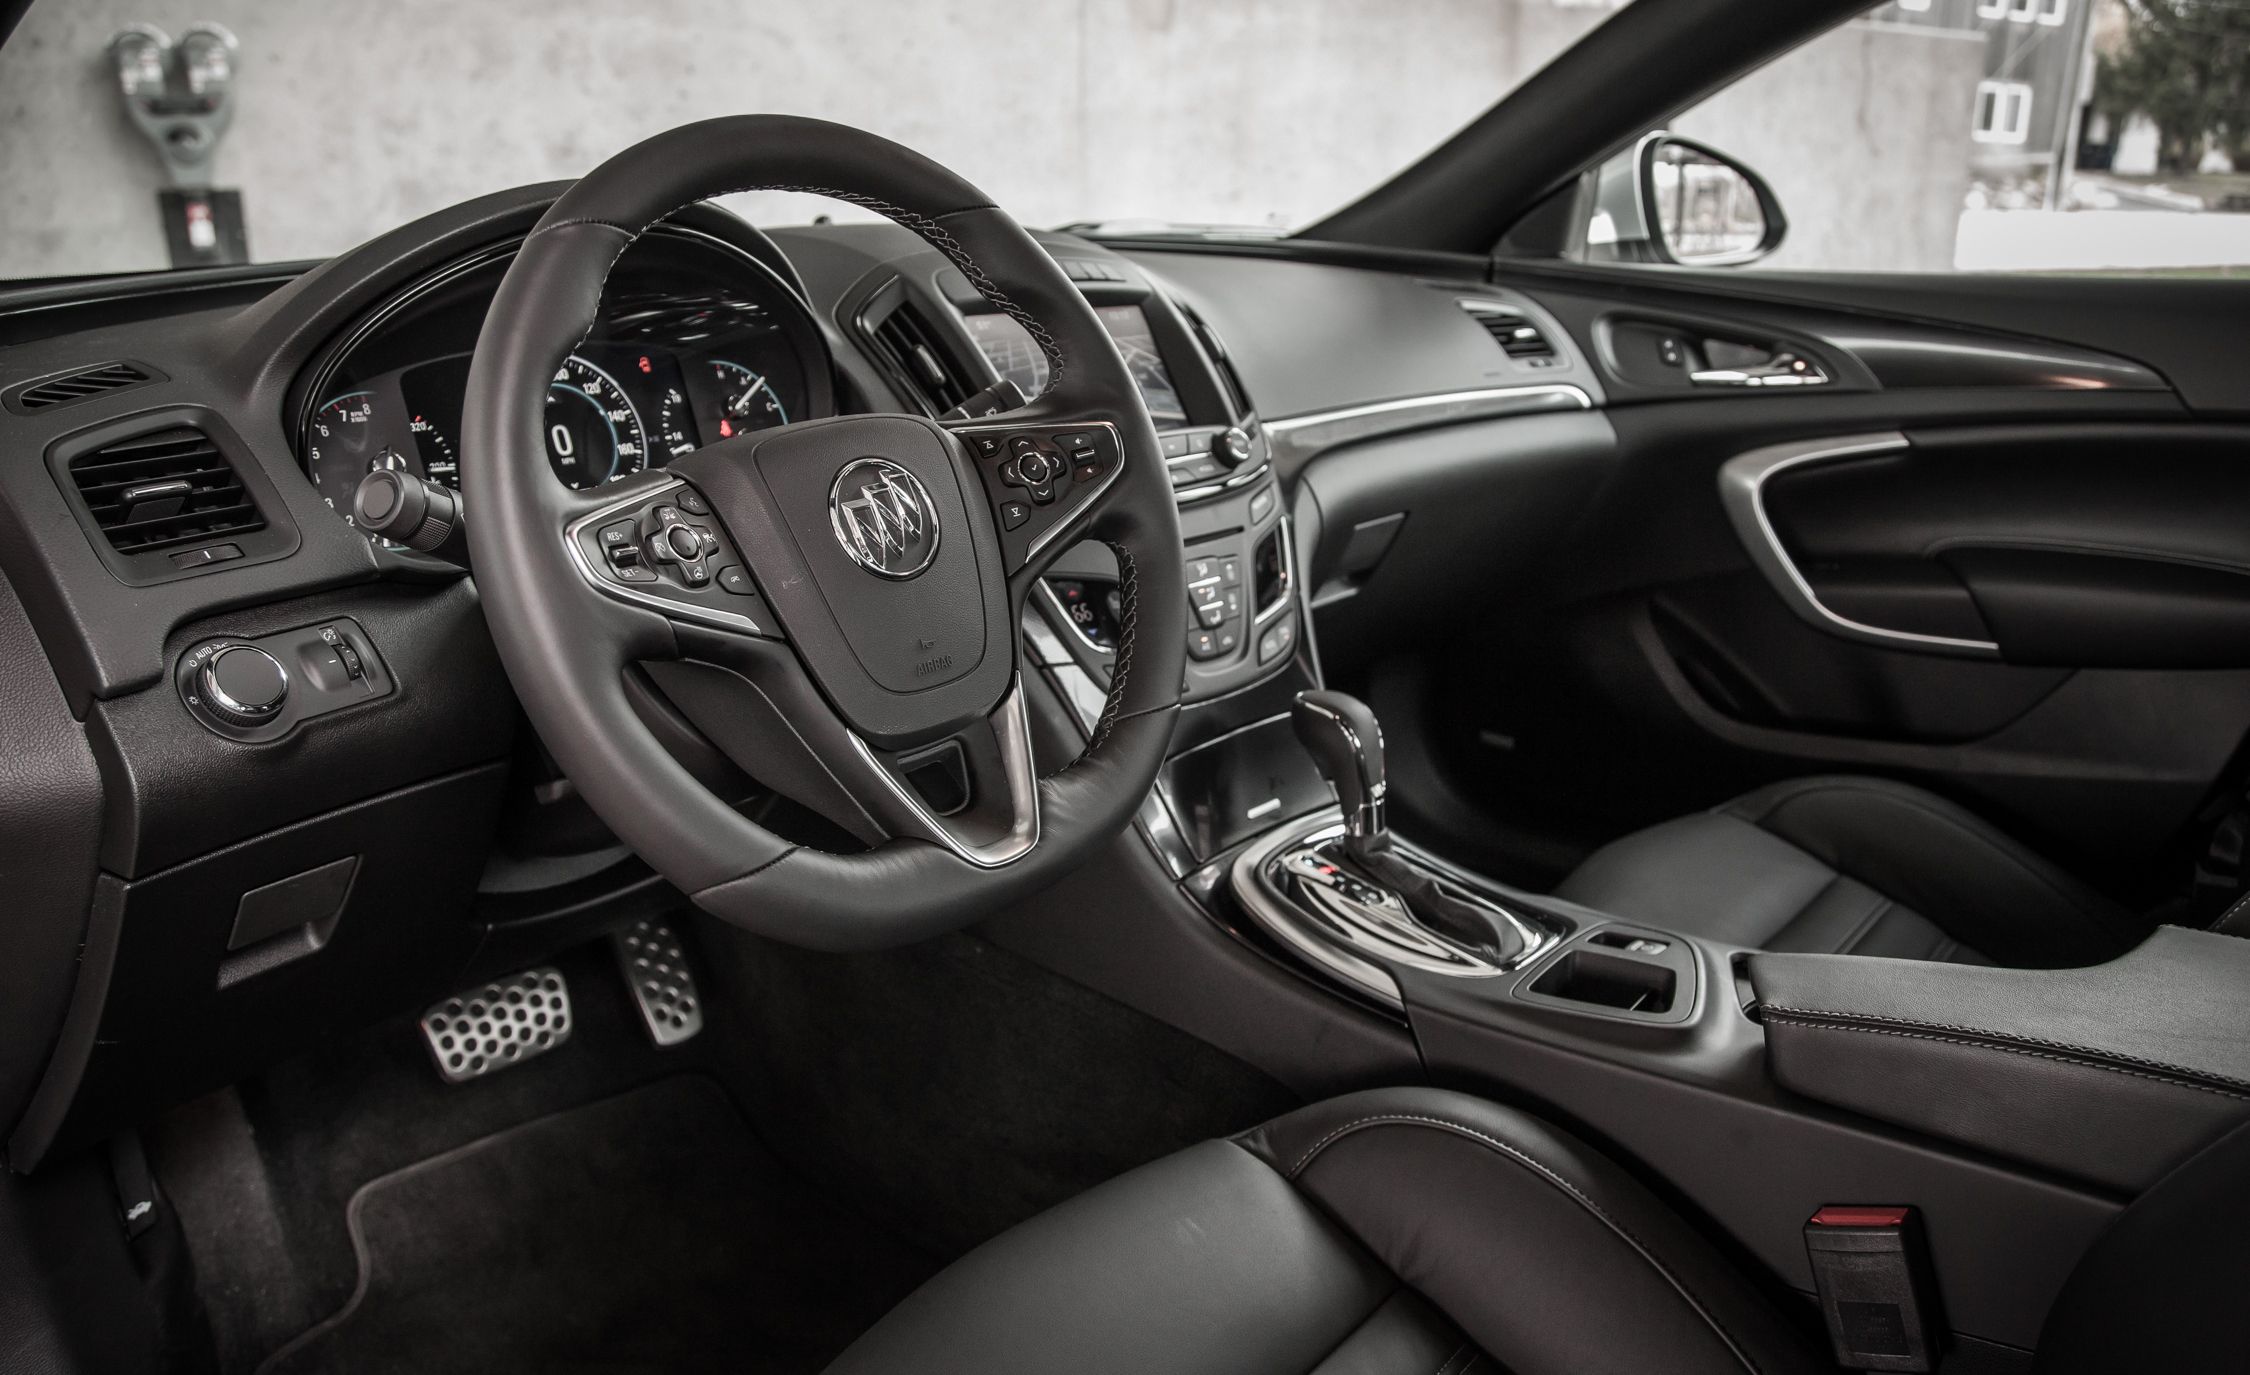 2014 Buick Regal Gs Interior (View 8 of 30)